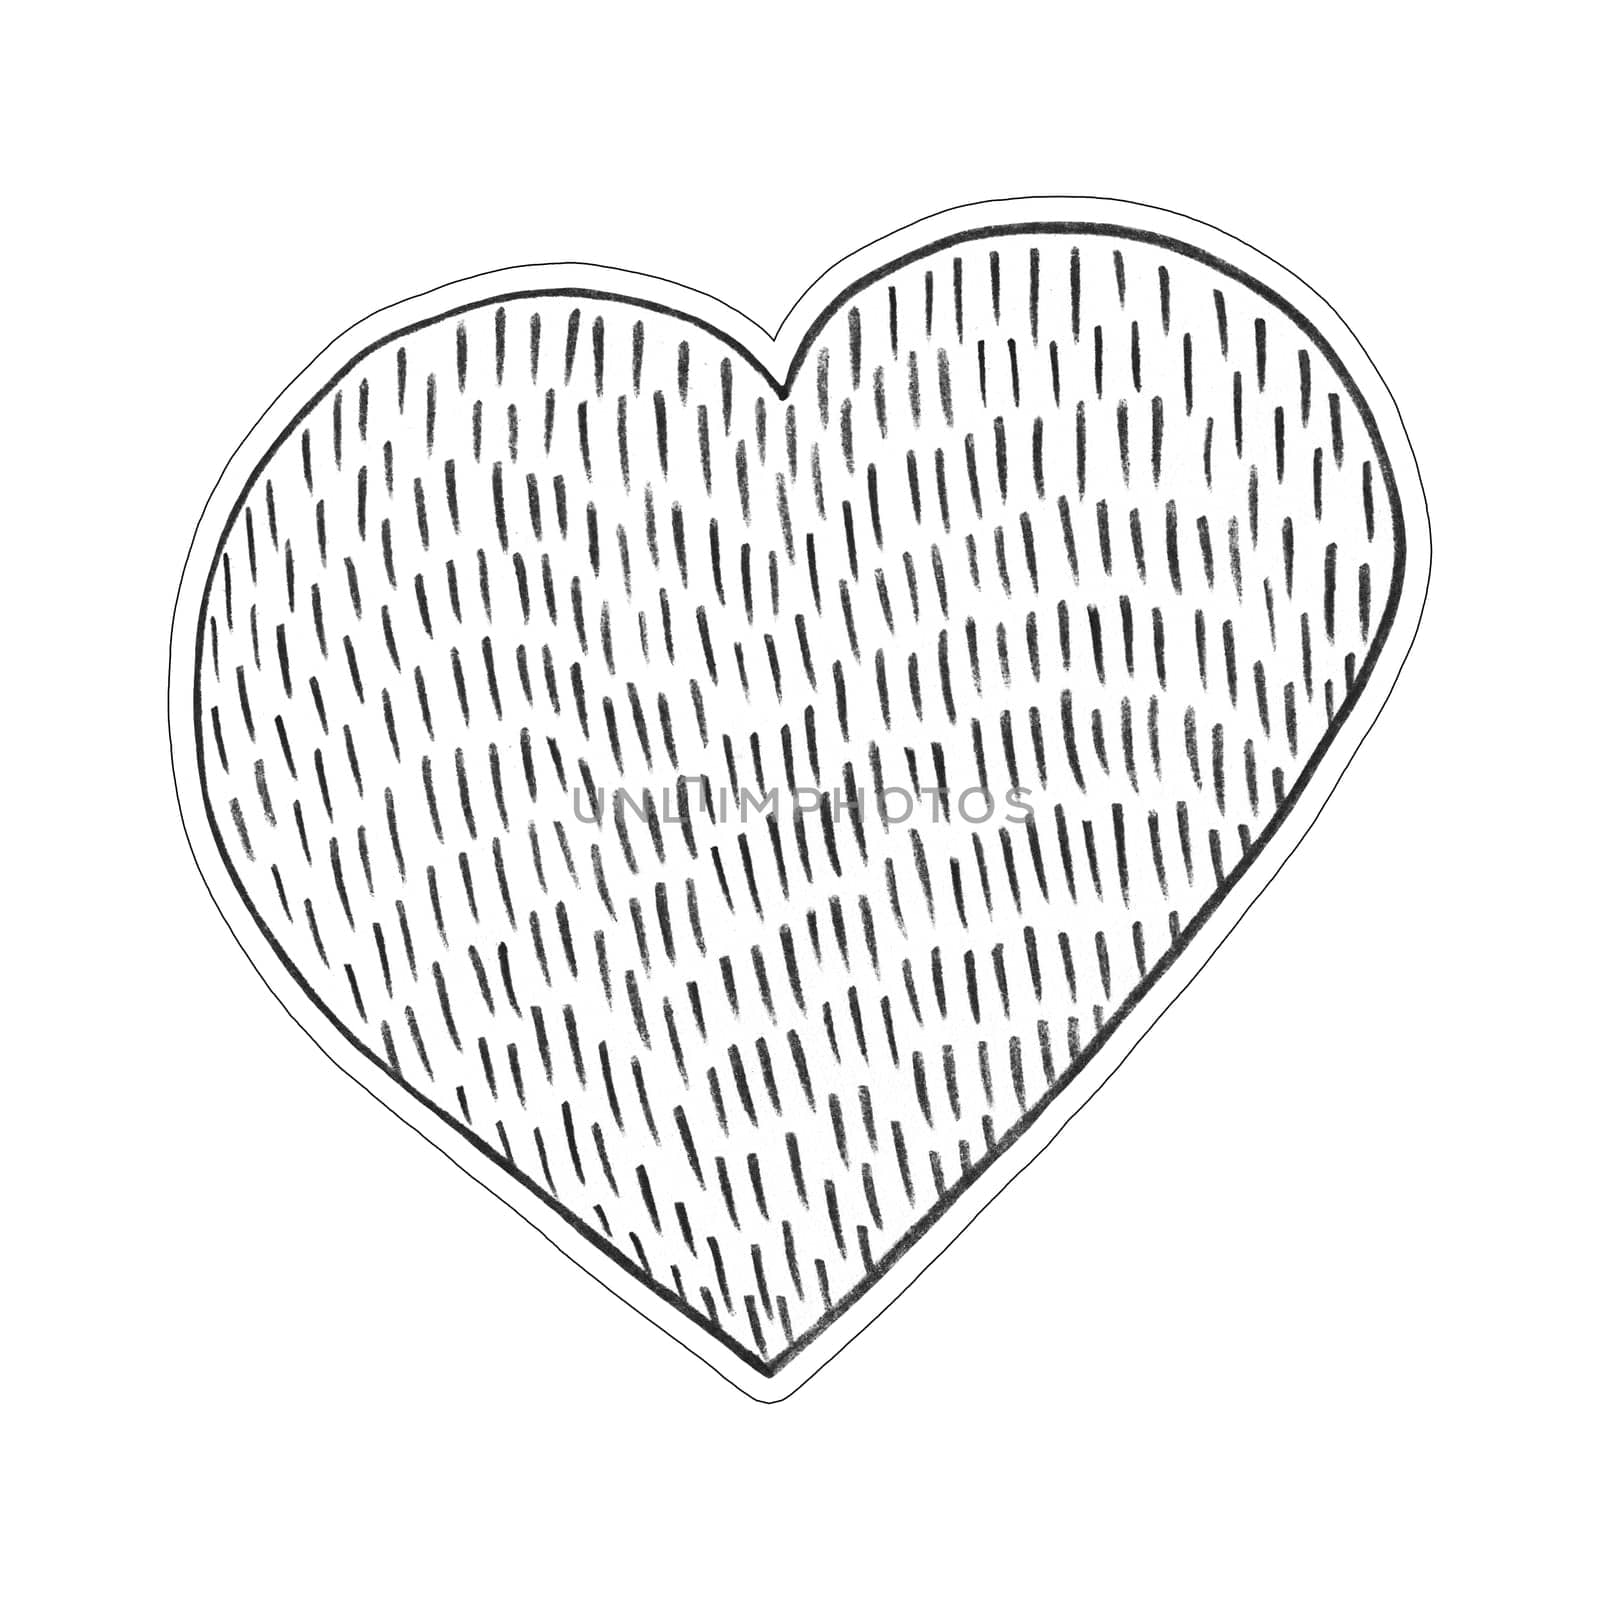 Black Heart Sticker Drawn by Colored Pencil. Heart Shape Isolated on White Background. by Rina_Dozornaya